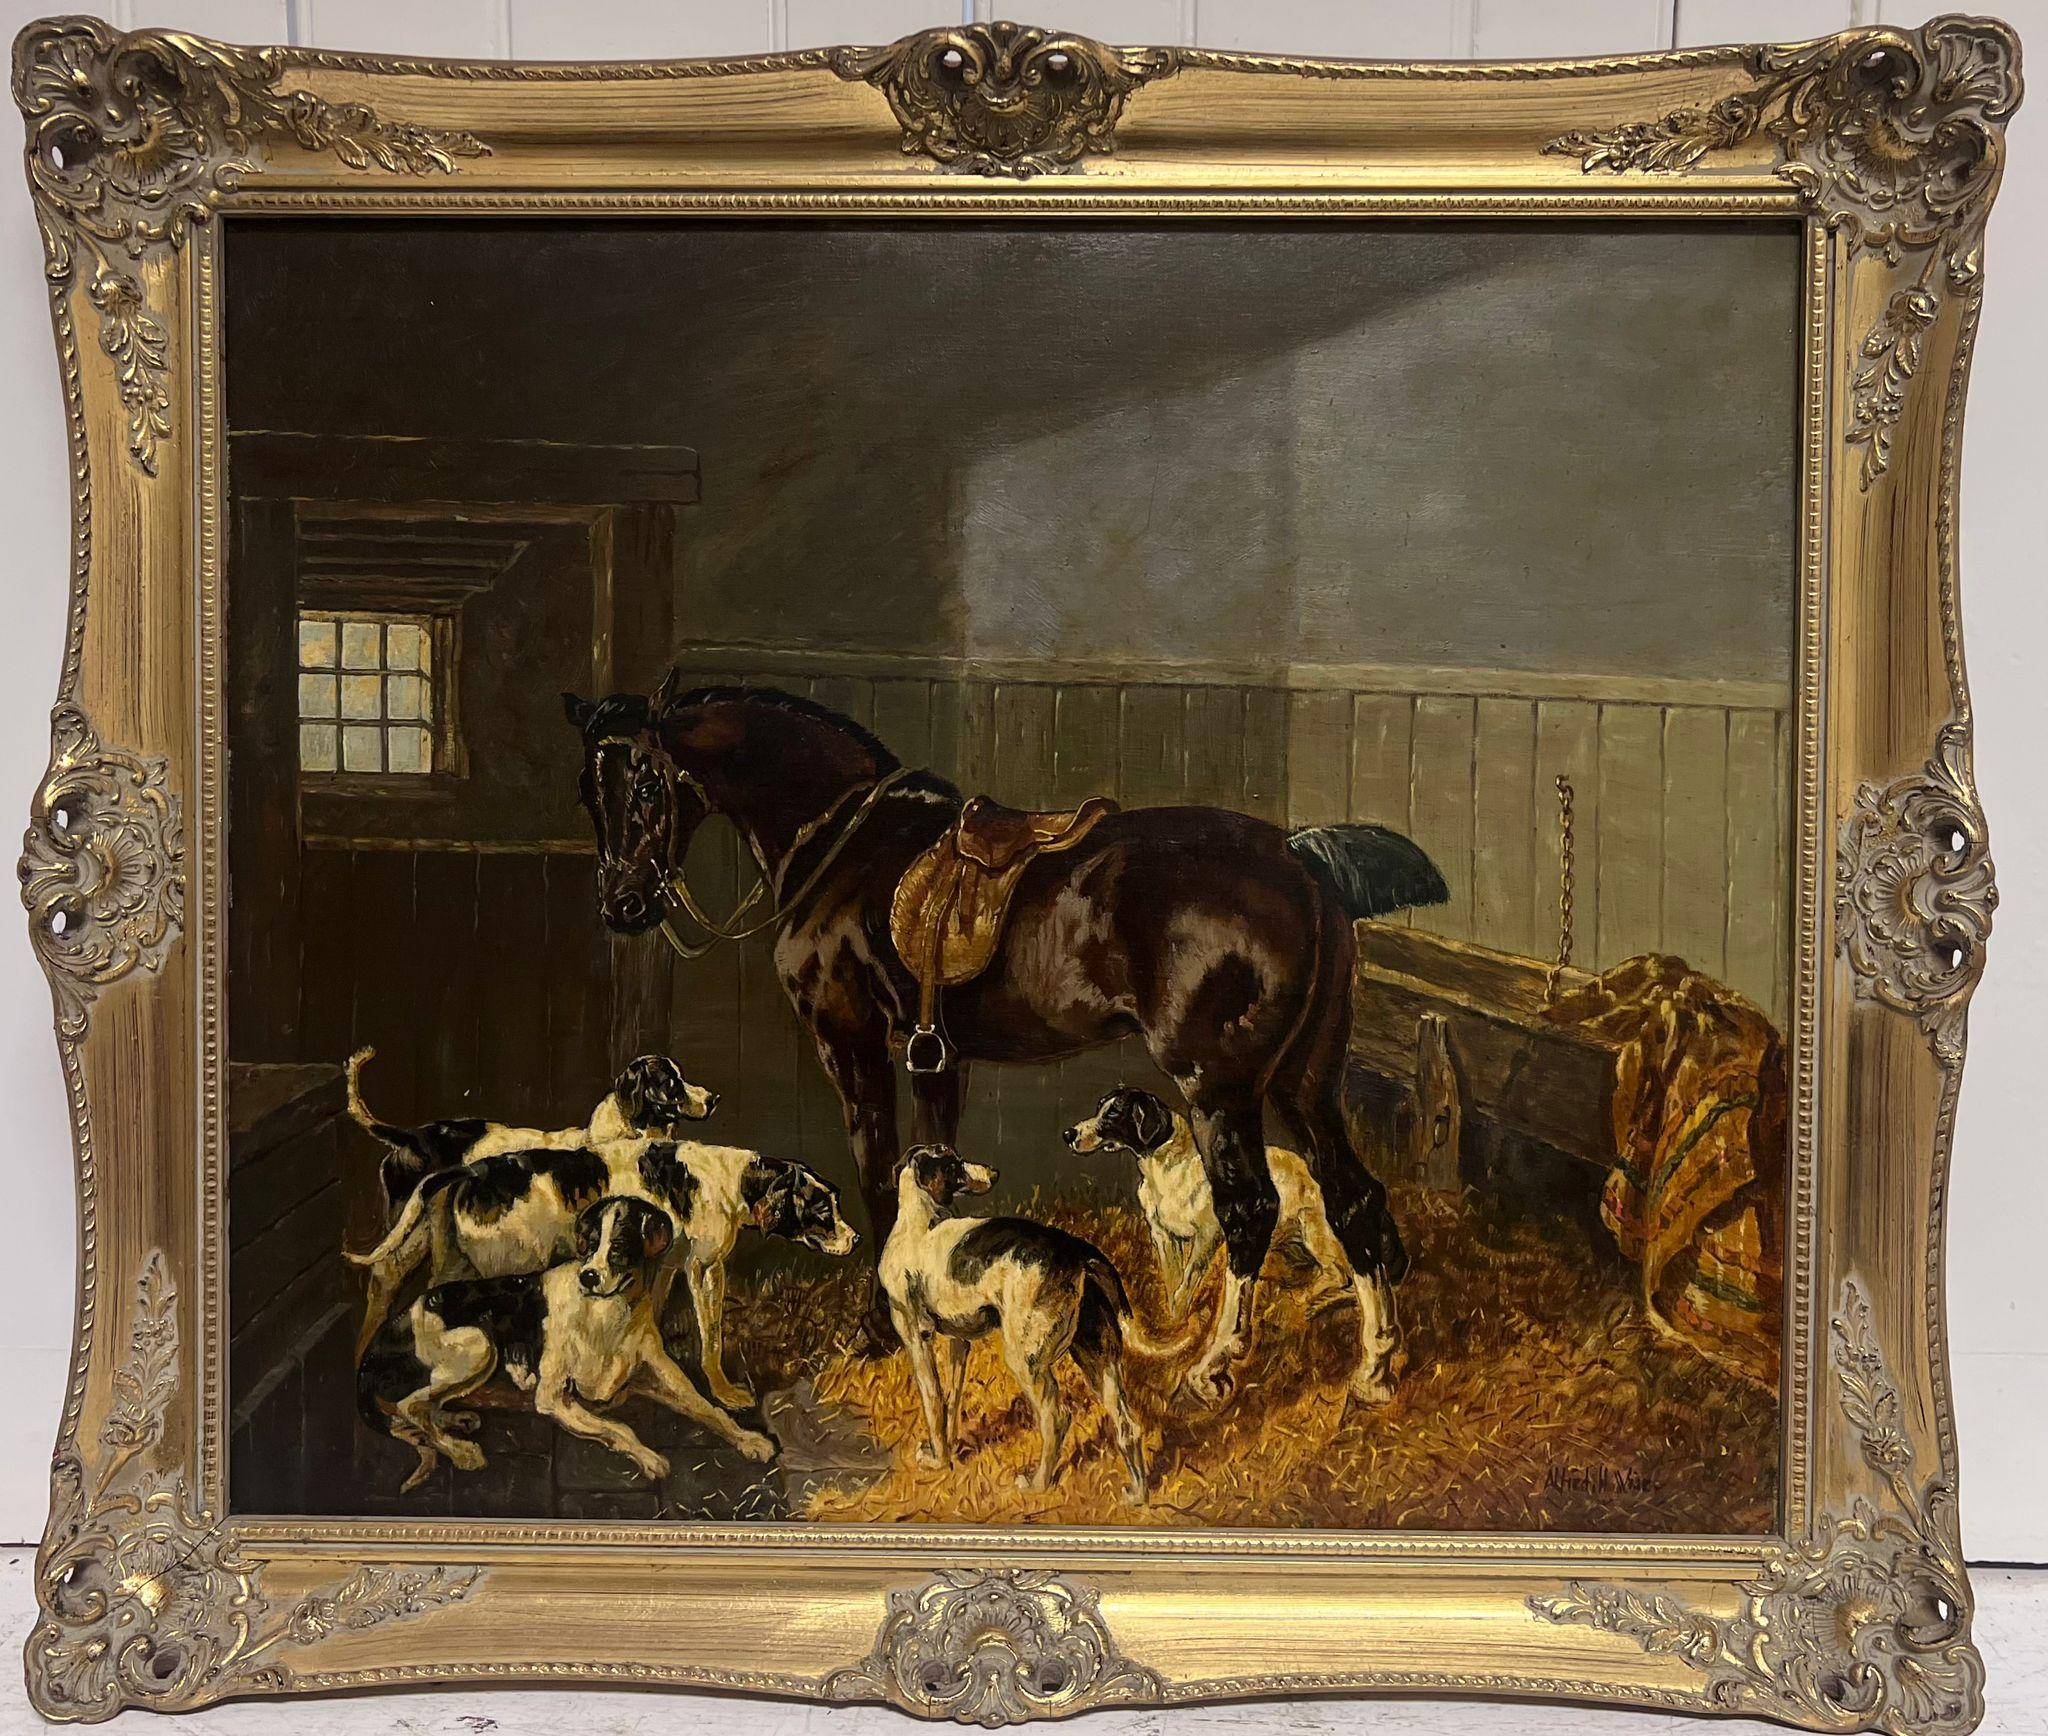 Stable Companions
by Alfred H. Wise (British early 20th century)
signed oil on canvas, framed
framed: 24 x 28 inches
canvas: 20 x 24 inches
provenance: private collection, England
condition: very good and sound condition 